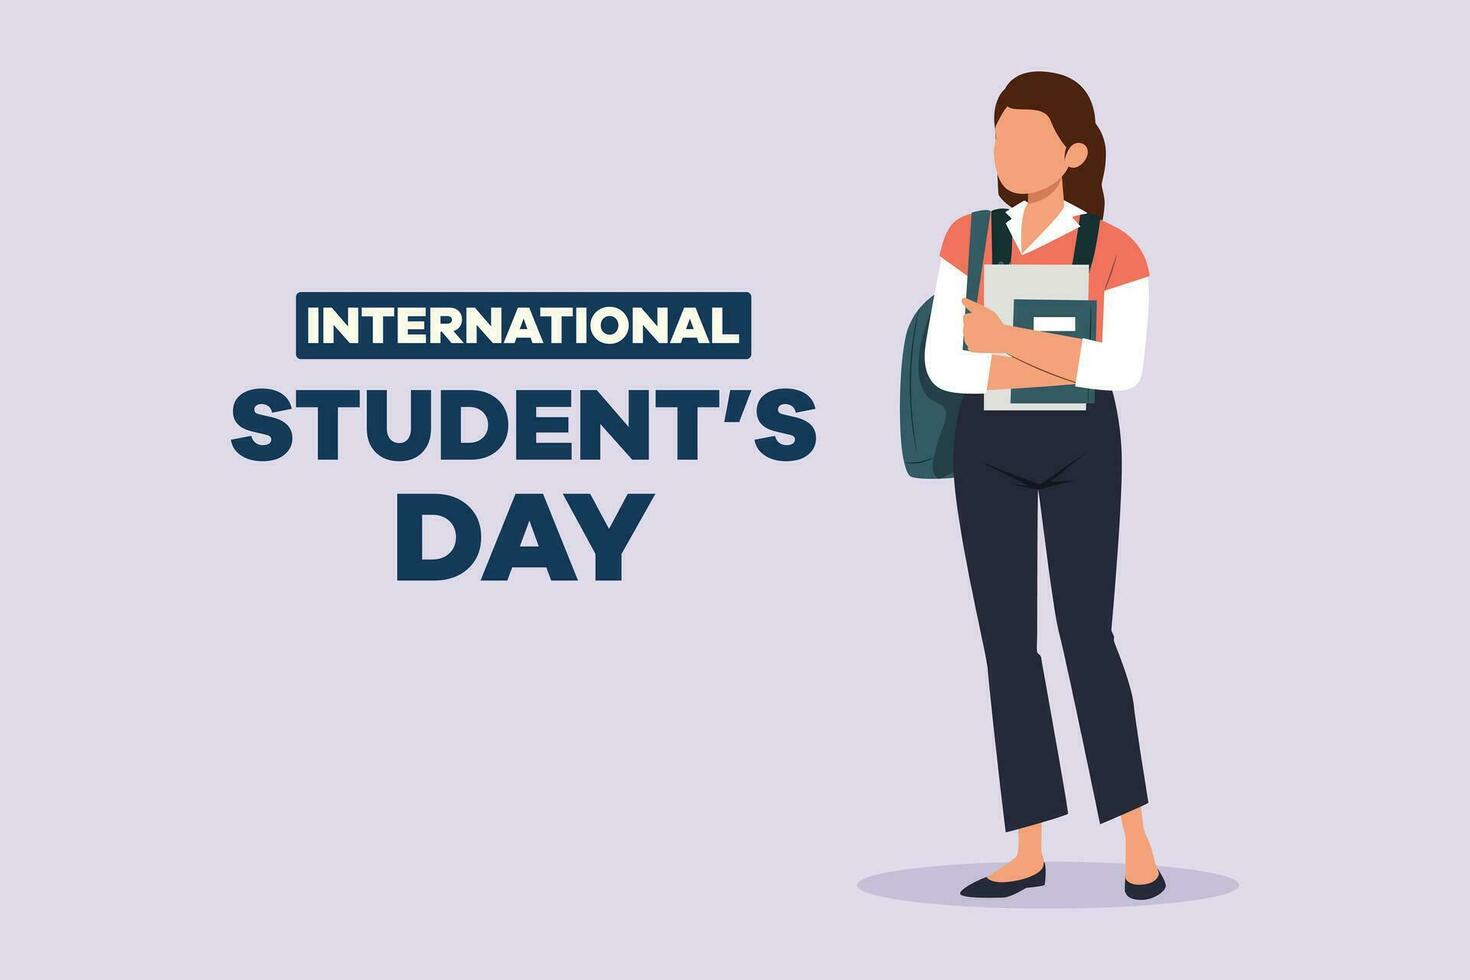 International student's day concept. Happy students. Colored flat vector illustration isolated.